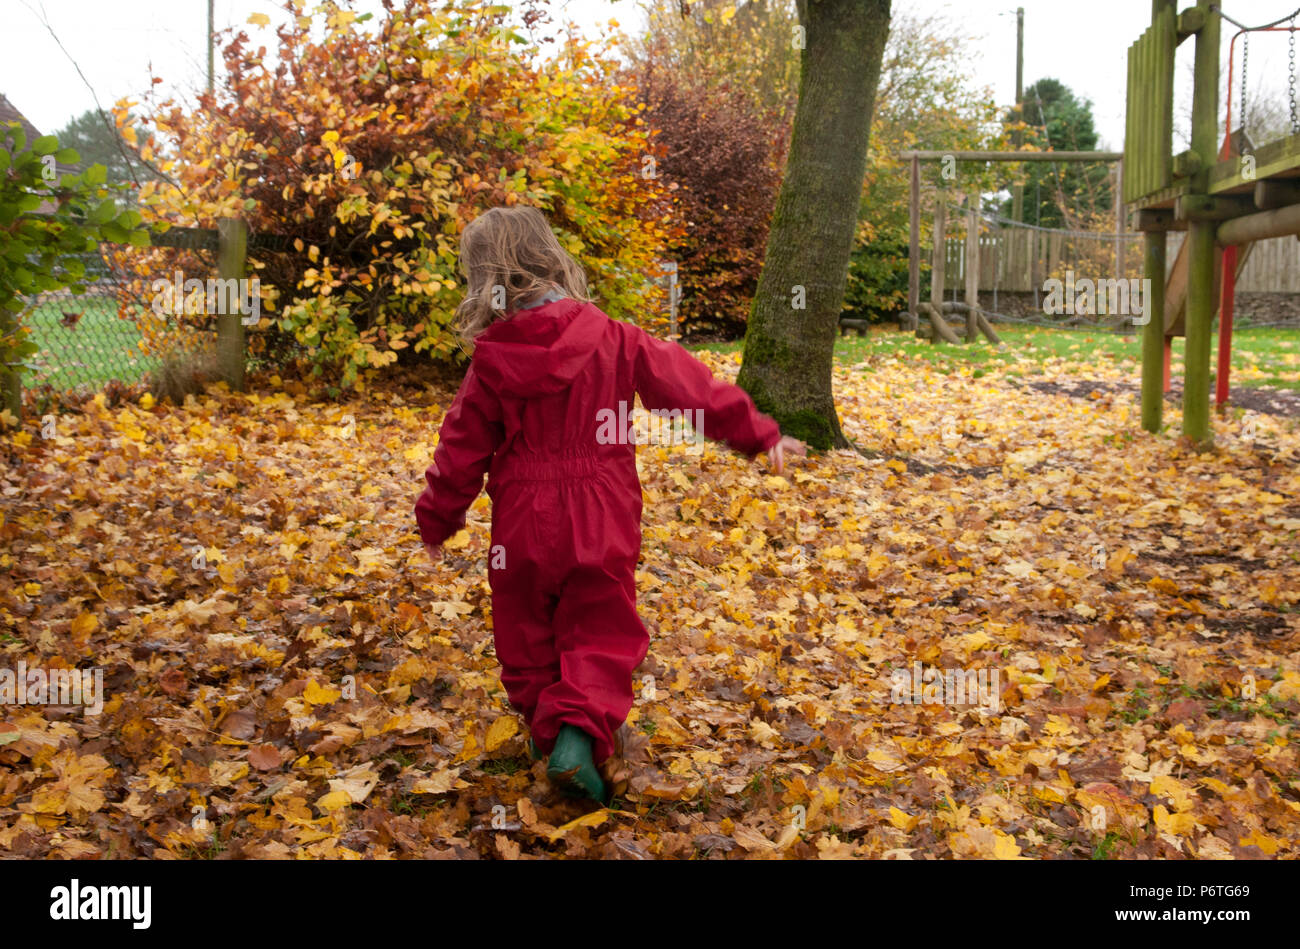 Rear view of toddler walking through autumn leaves wearing a red puddle suit and green wellies Stock Photo